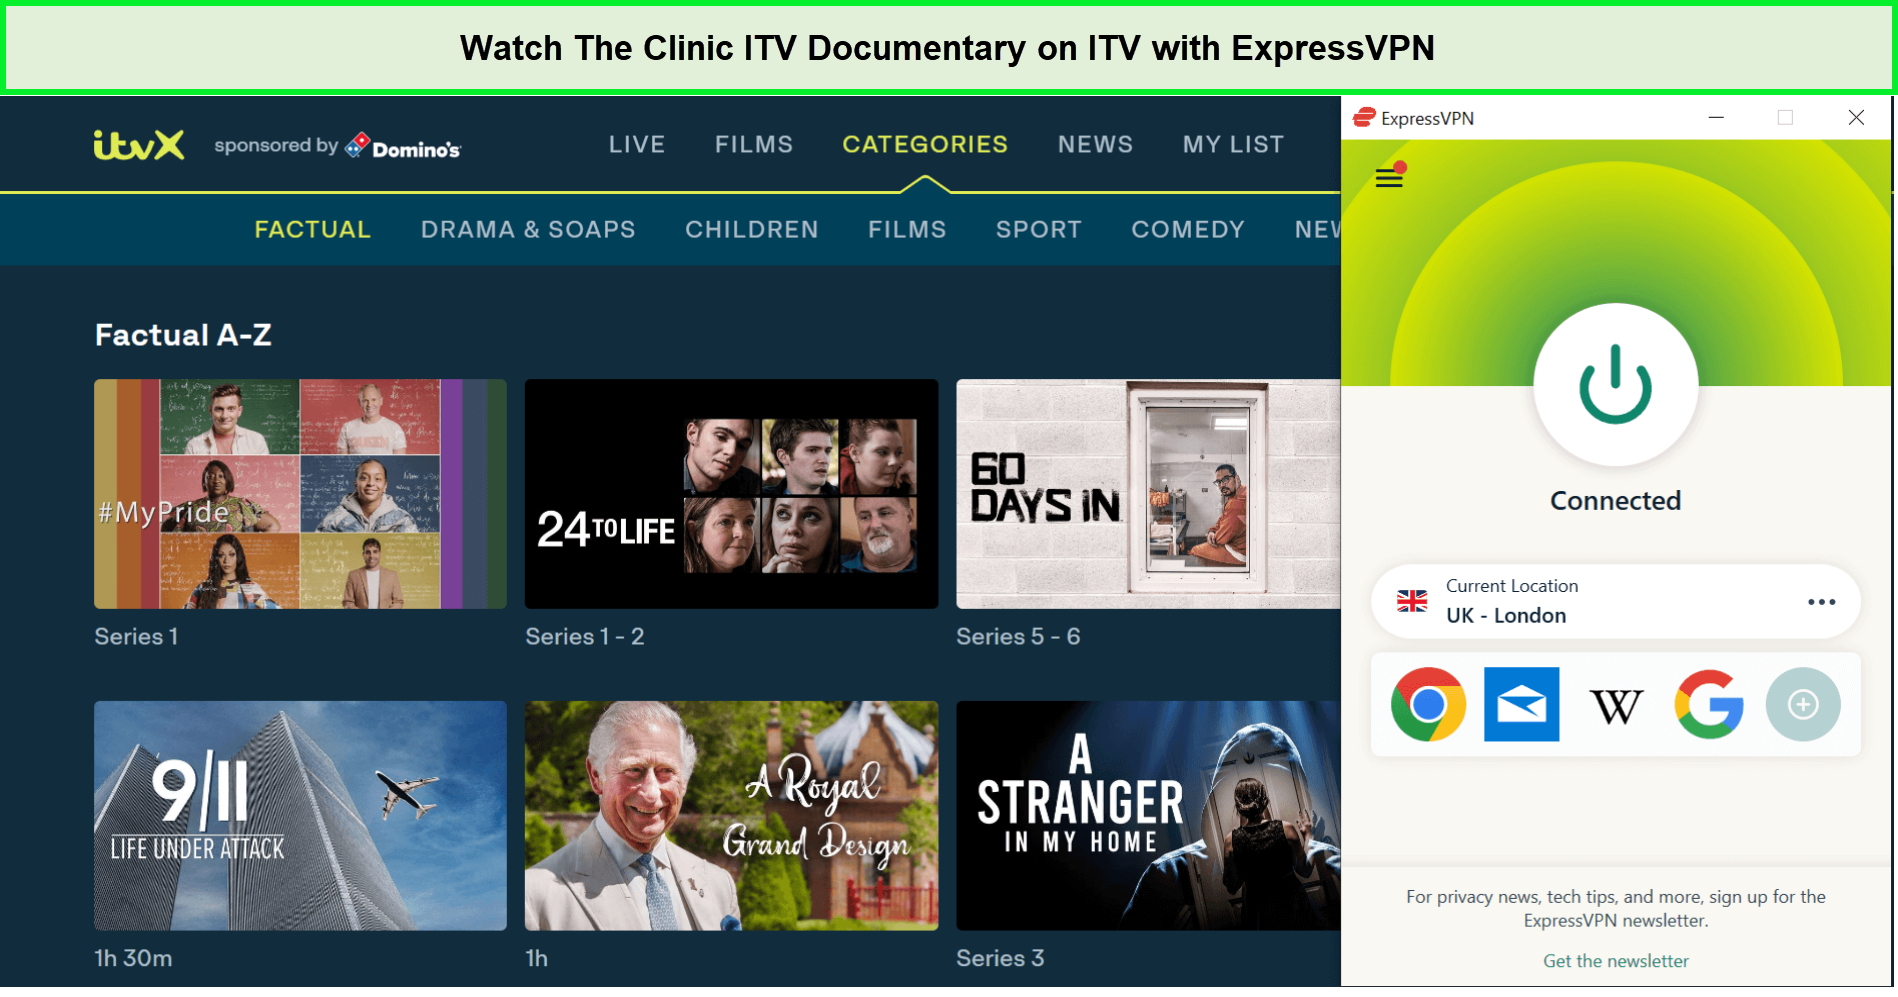 Watch-The-Clinic-ITV-Documentary-in-Italy-on-ITV-with-ExpressVPN.